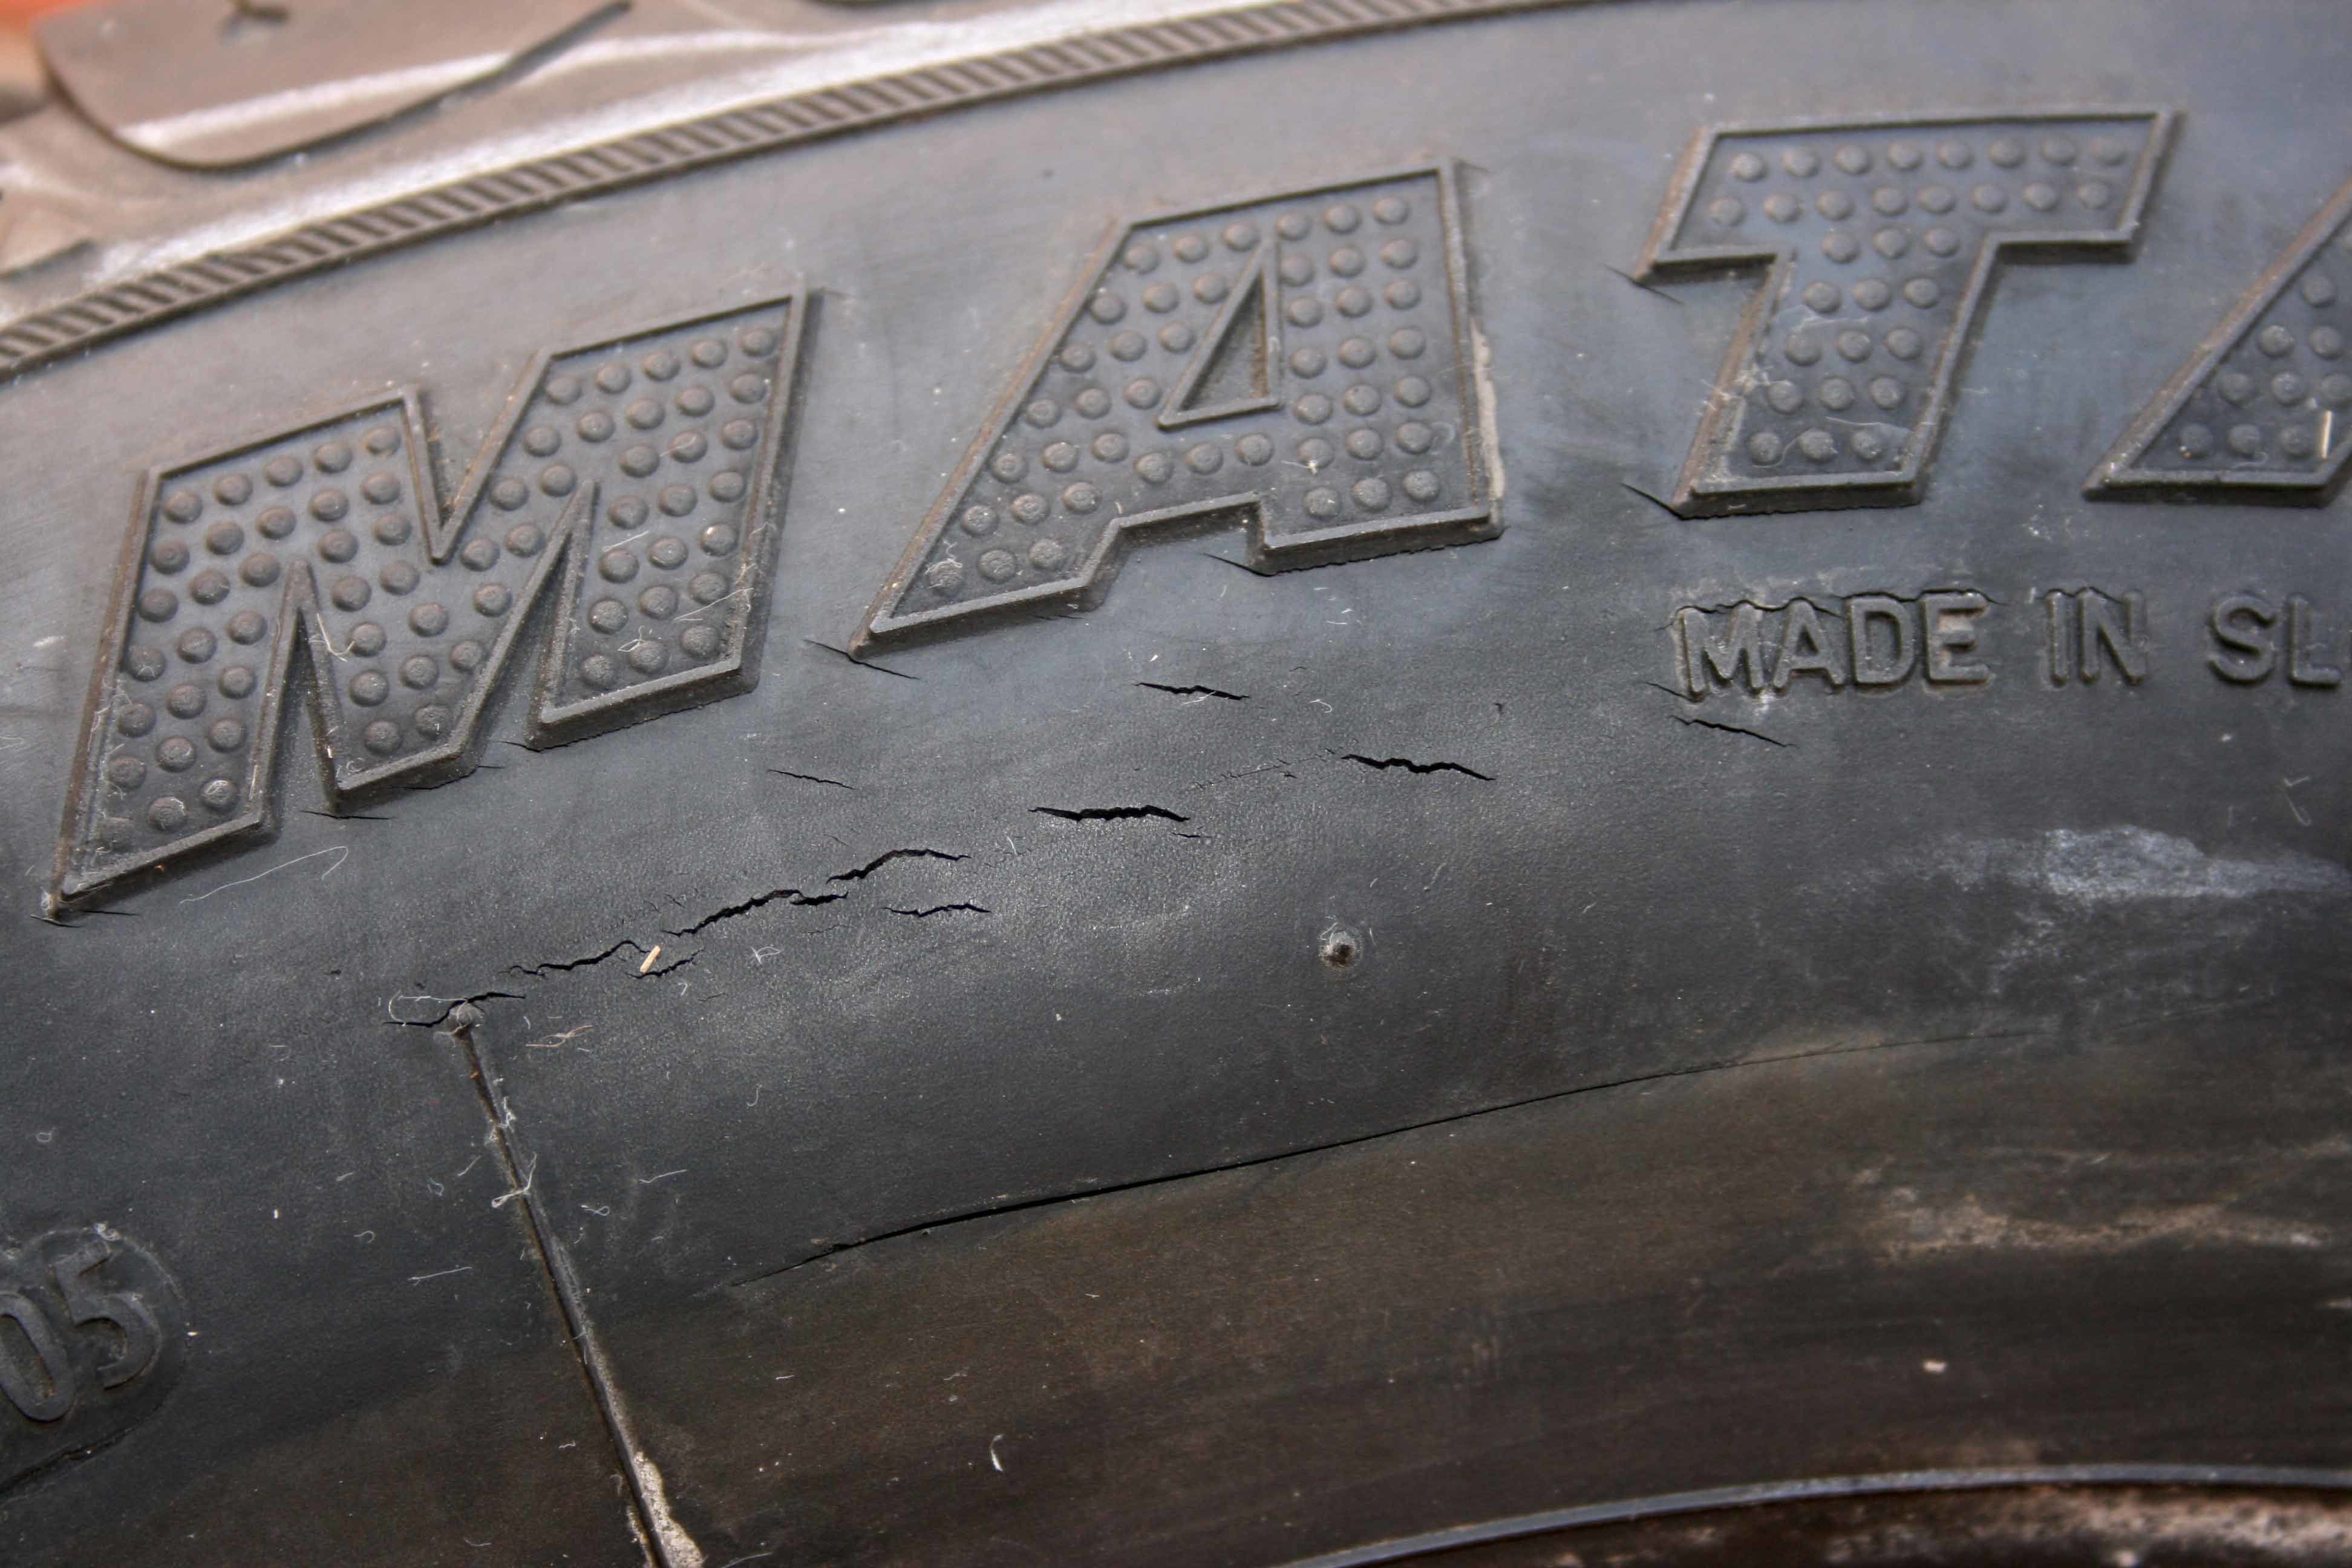 Caravan tyres are susceptible to ageing and may need replacing even though the tread is fine